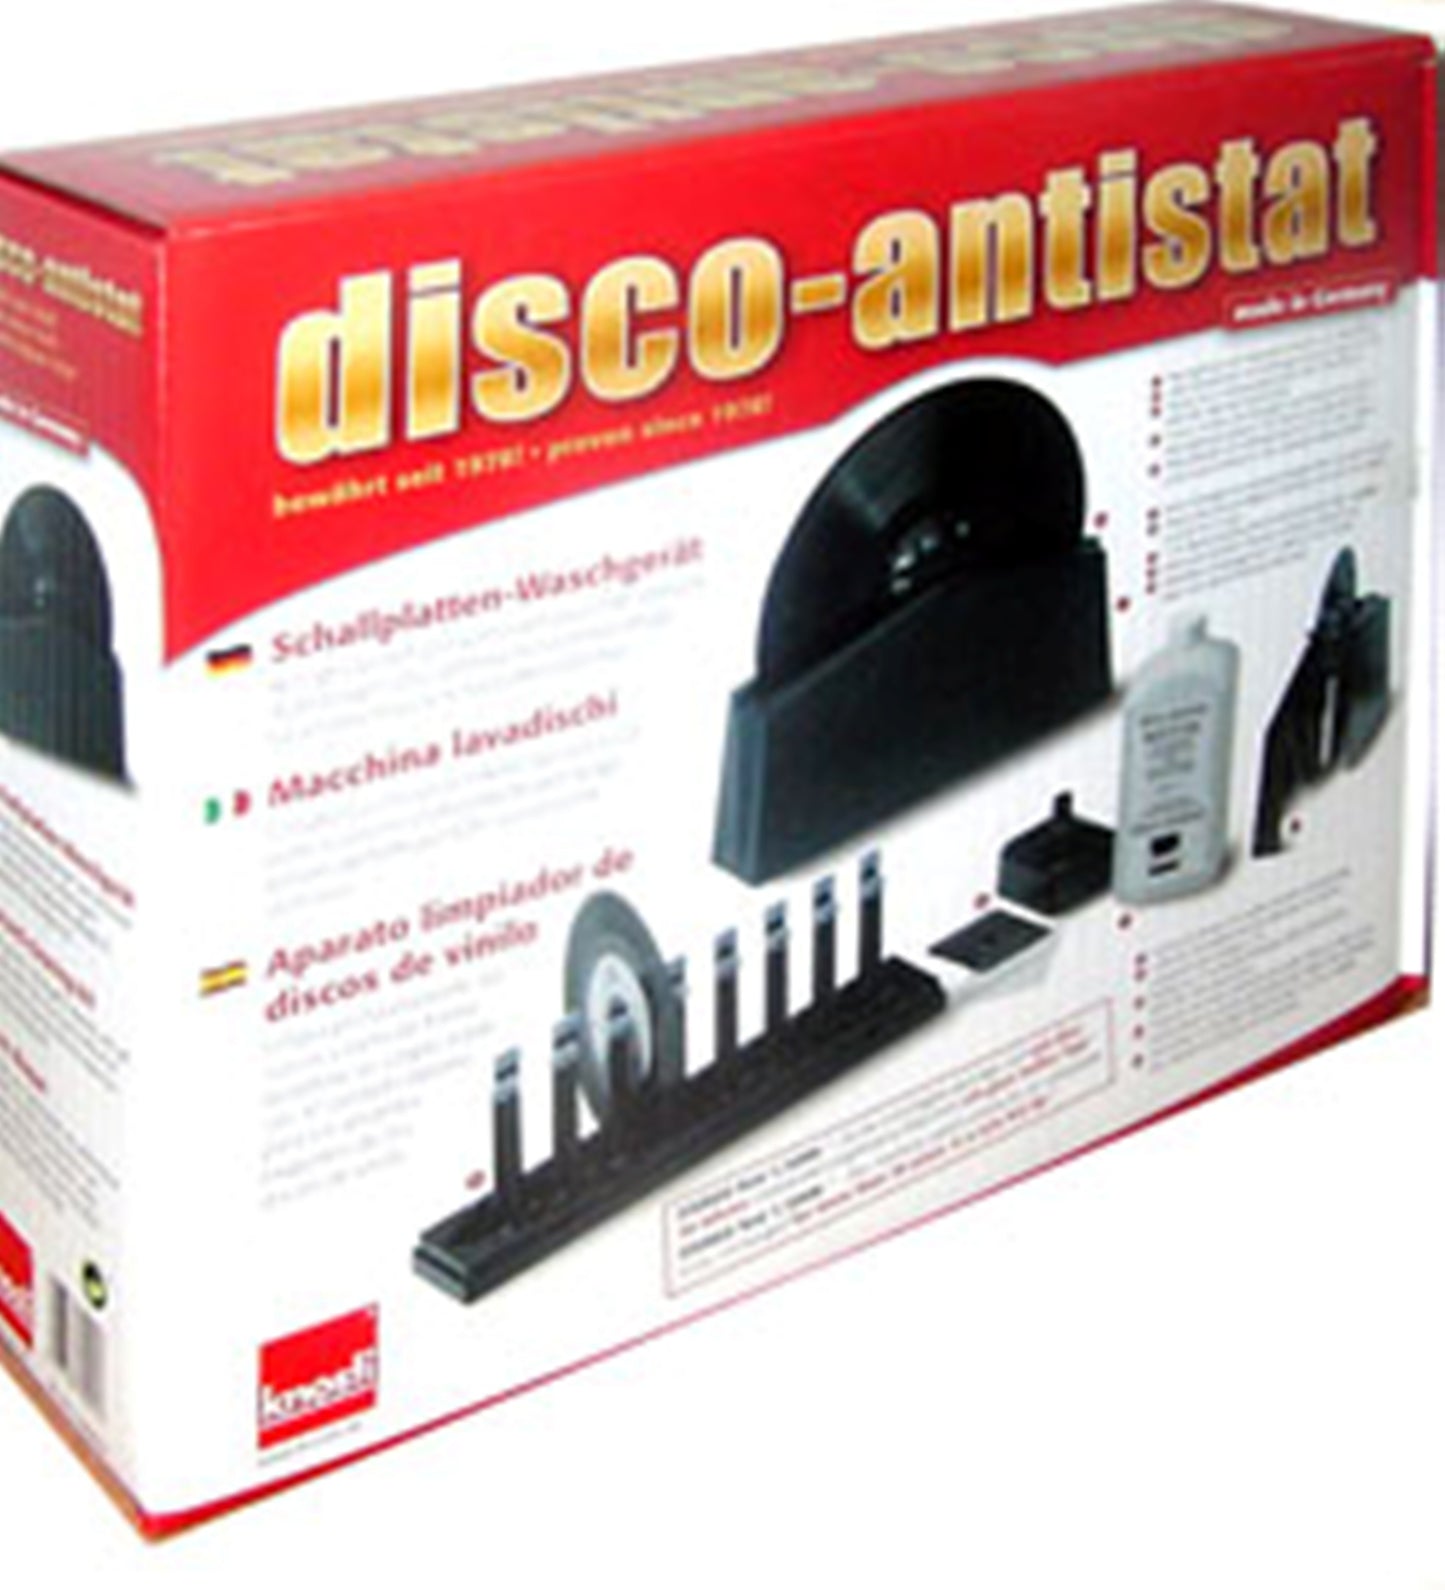 knosti disco-antistat Record cleaning kit - [LP]